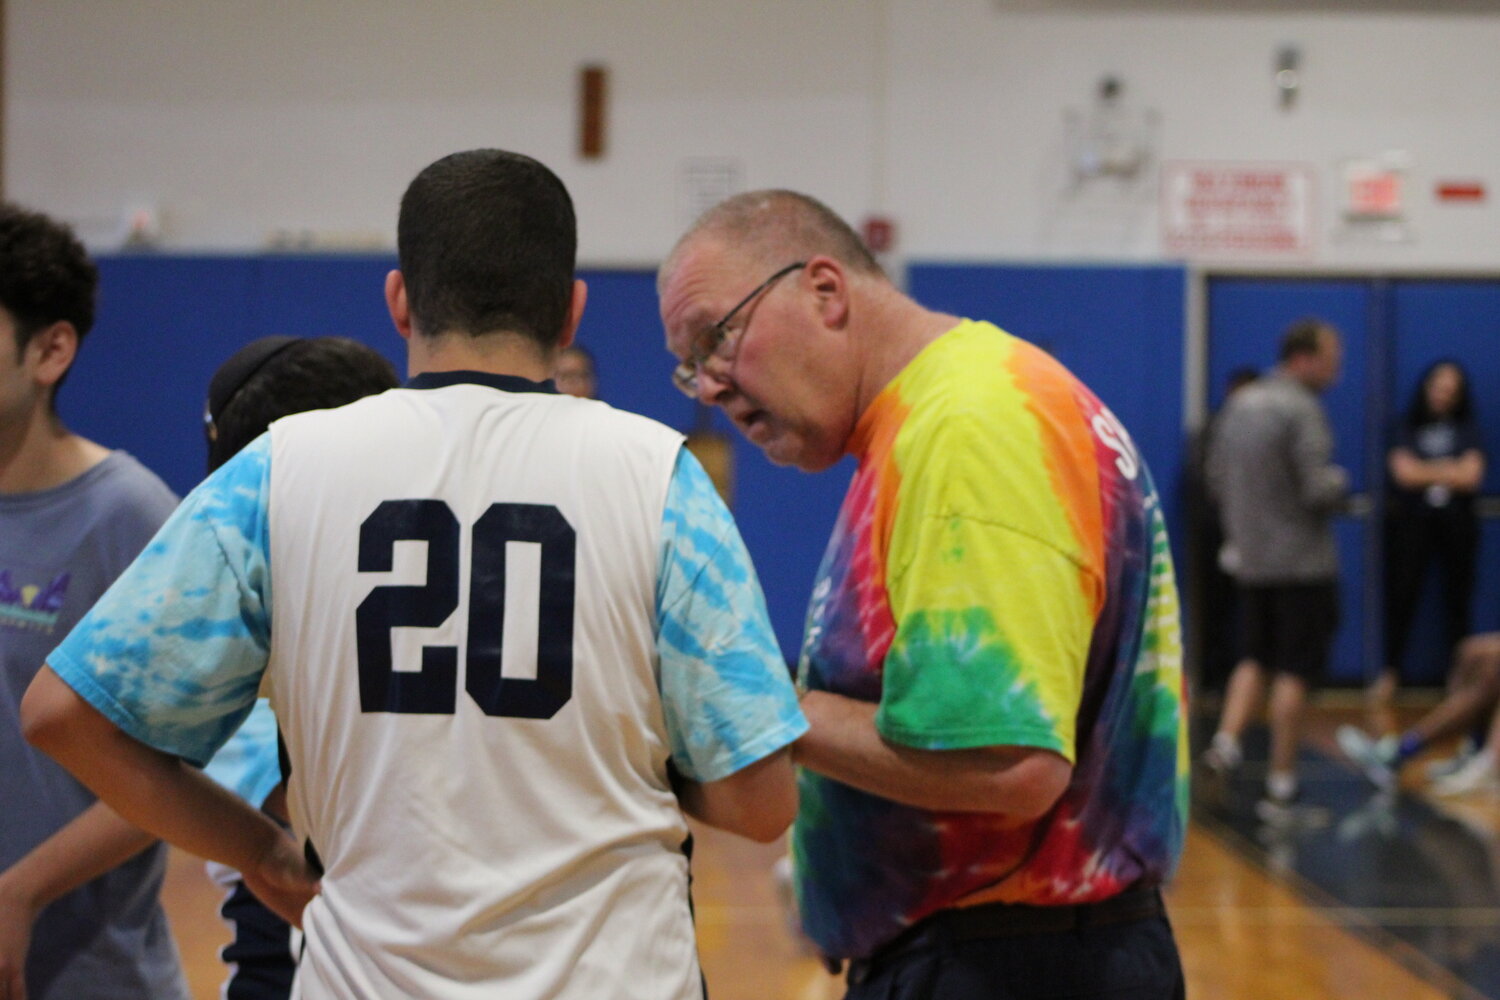 Hewlett High School Unified Basketball coach Bill Dubin, right, talks strategy with forward Jared Bostoff during a timeout in the May 24 game against Lawrence.